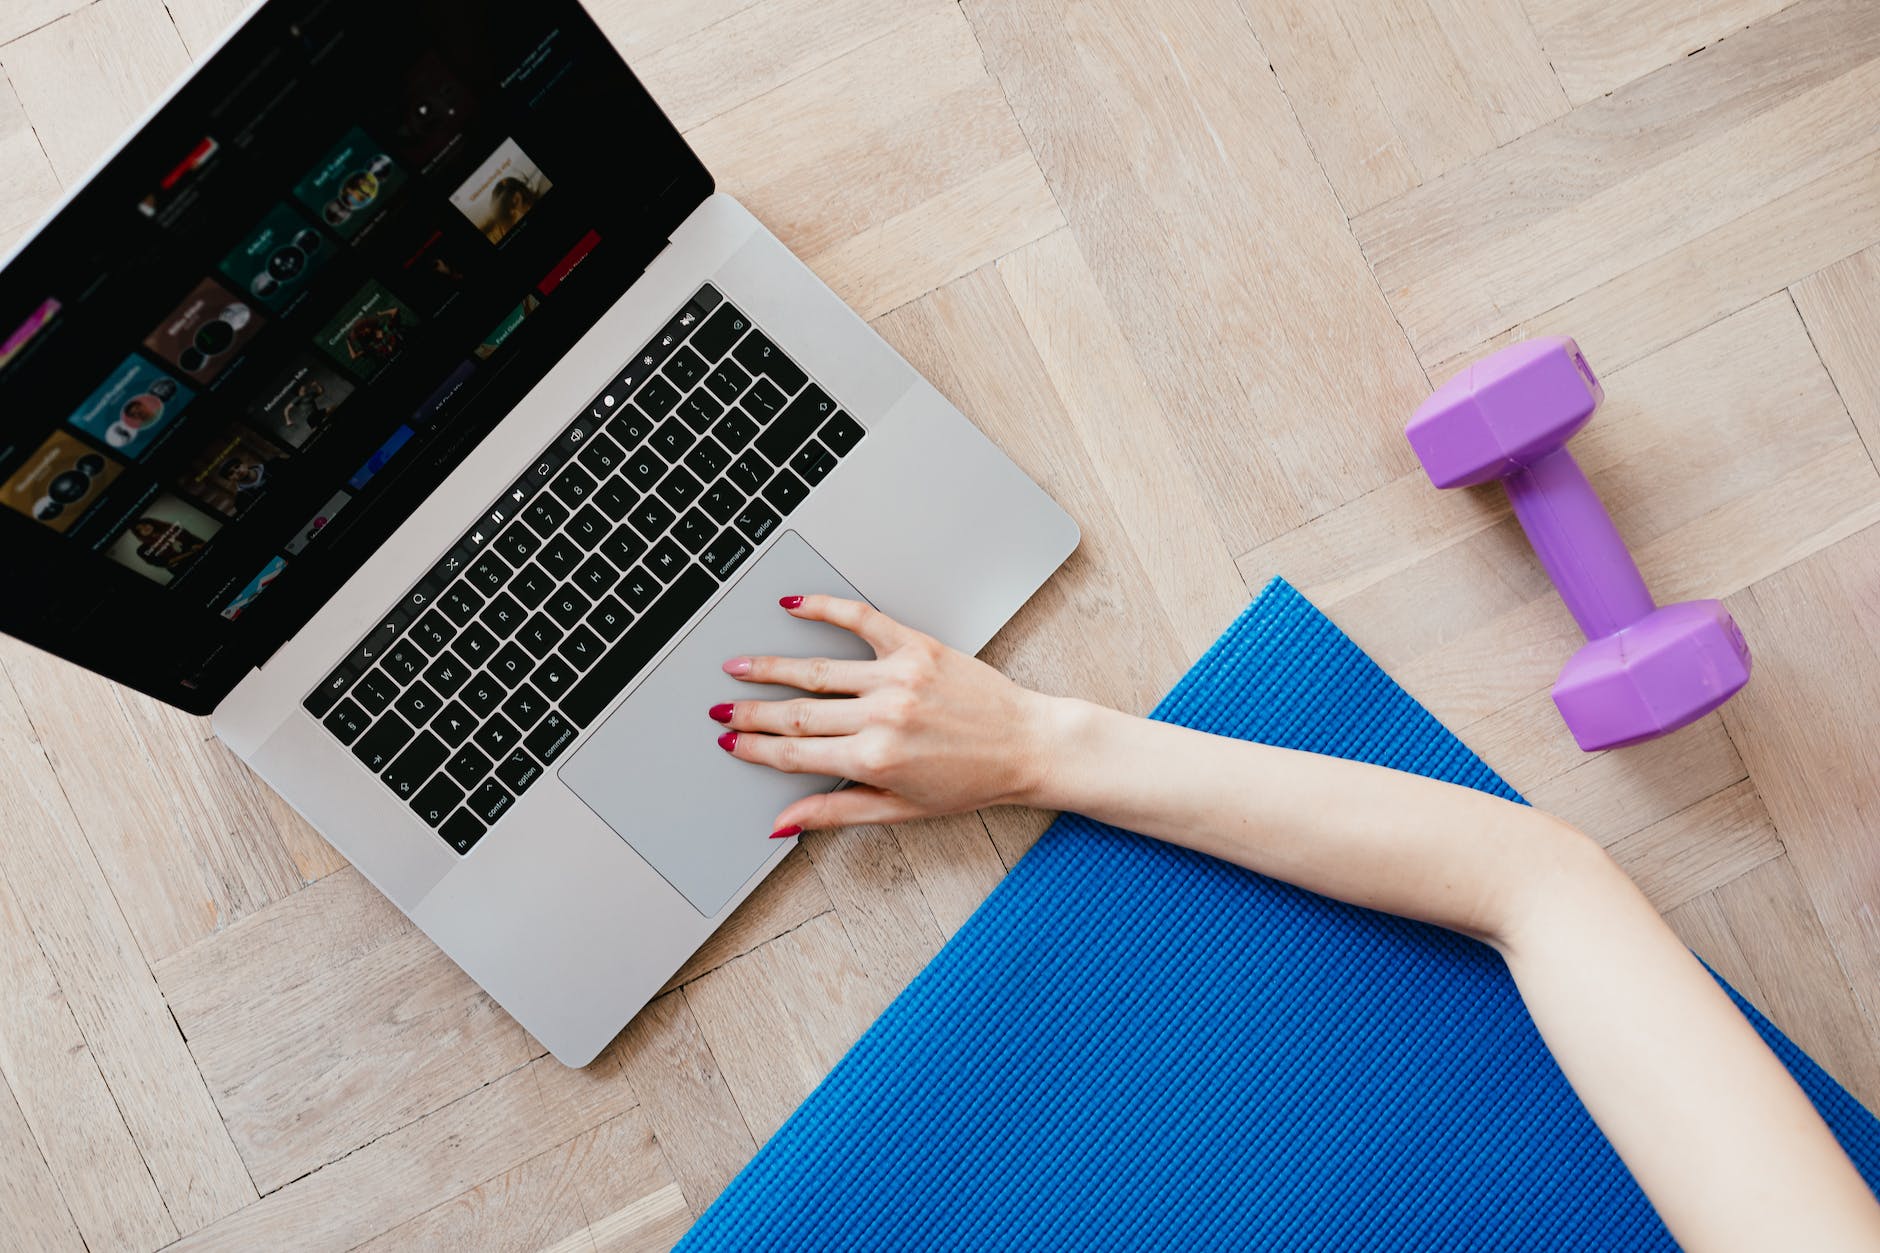 crop woman with laptop and dumbbell on sports mat